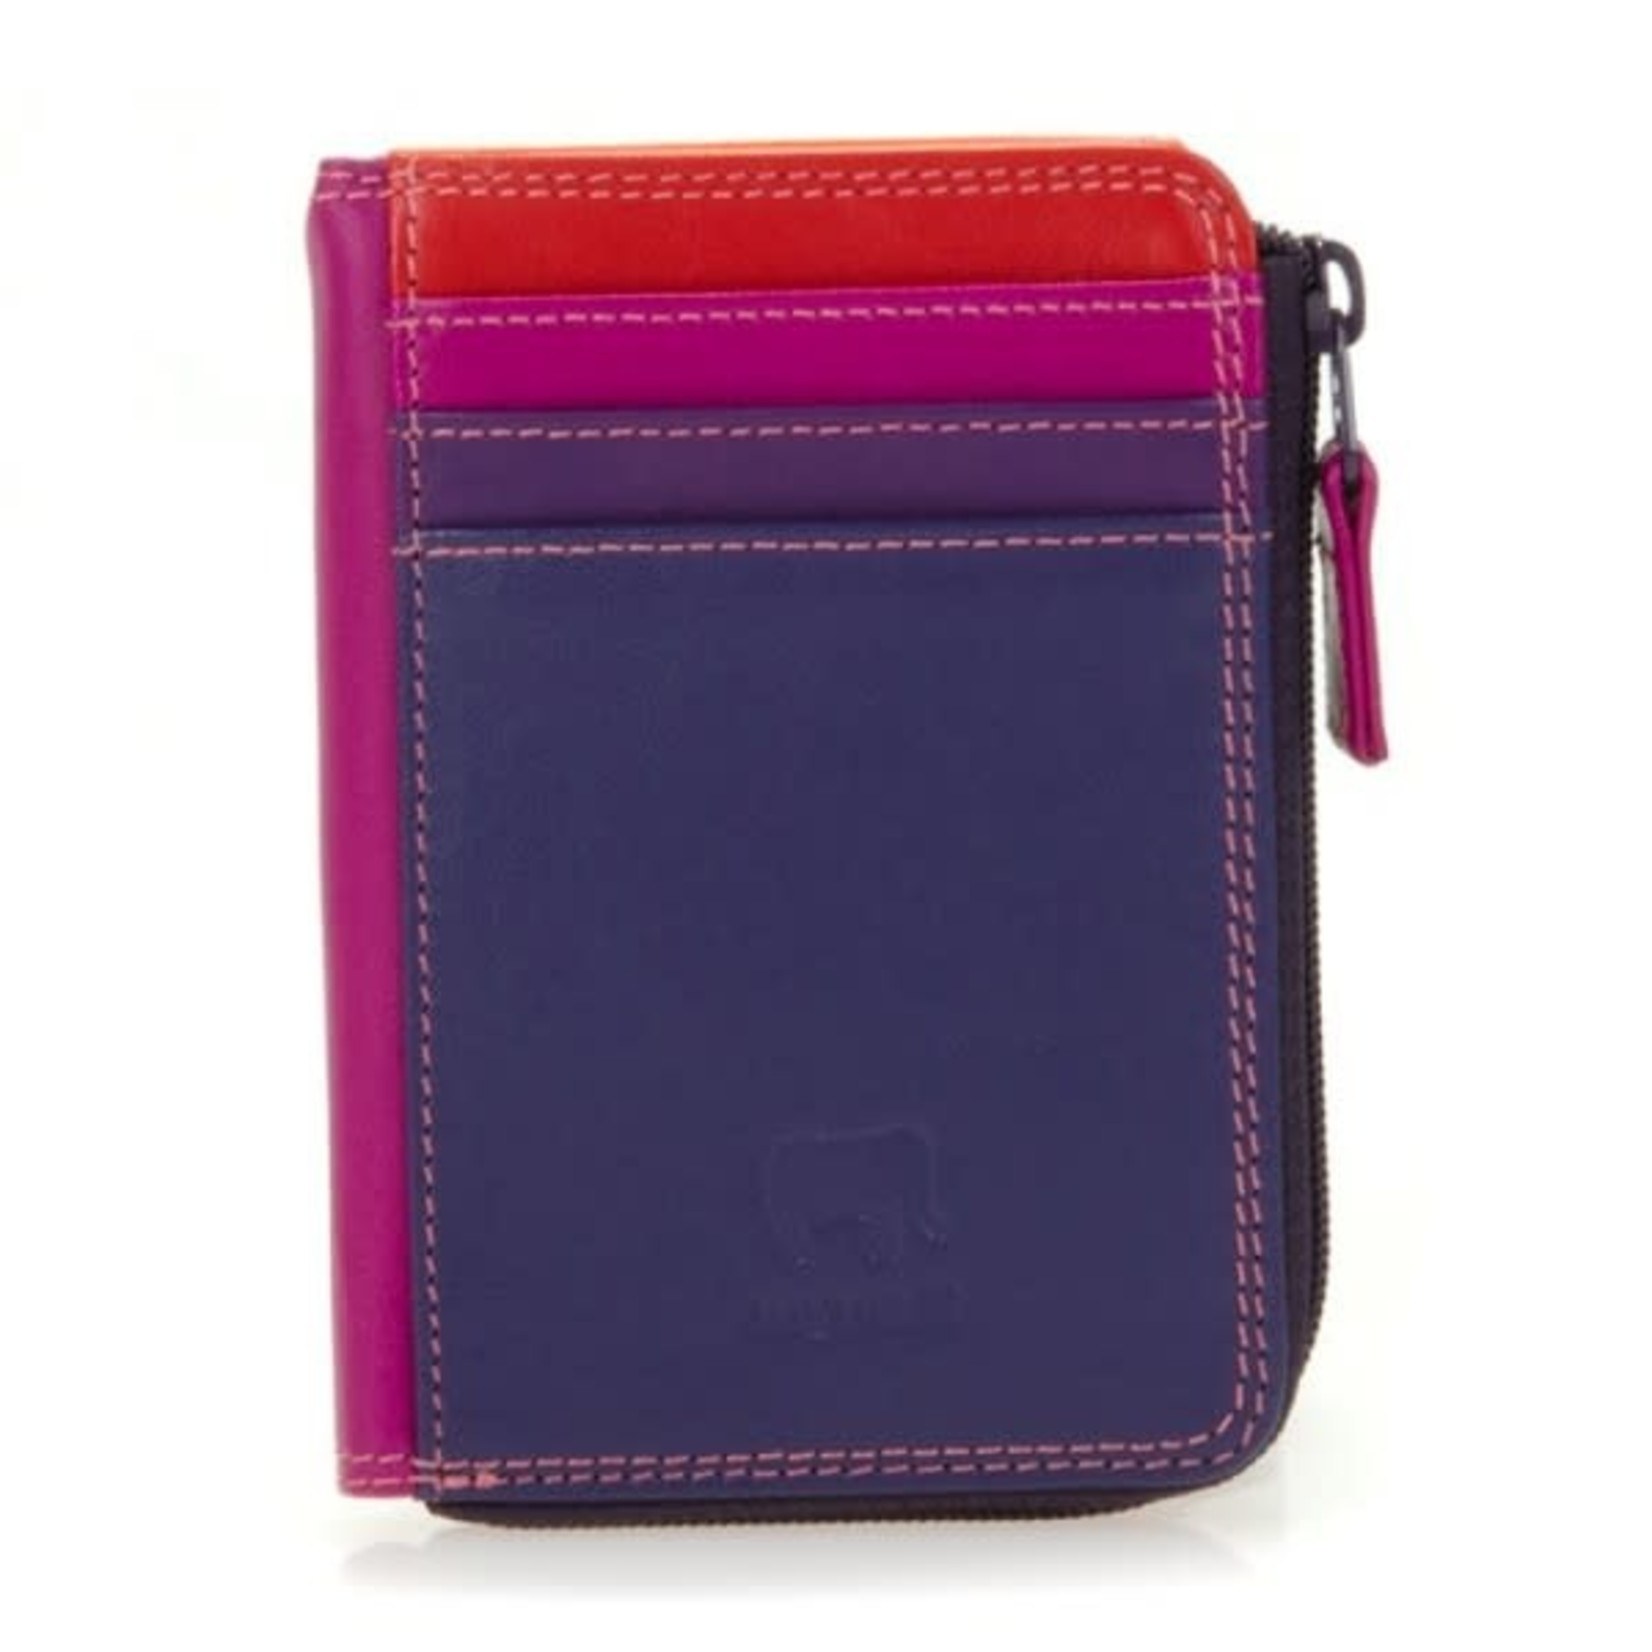 MYWALIT ZIP PURSE/ID HOLDER